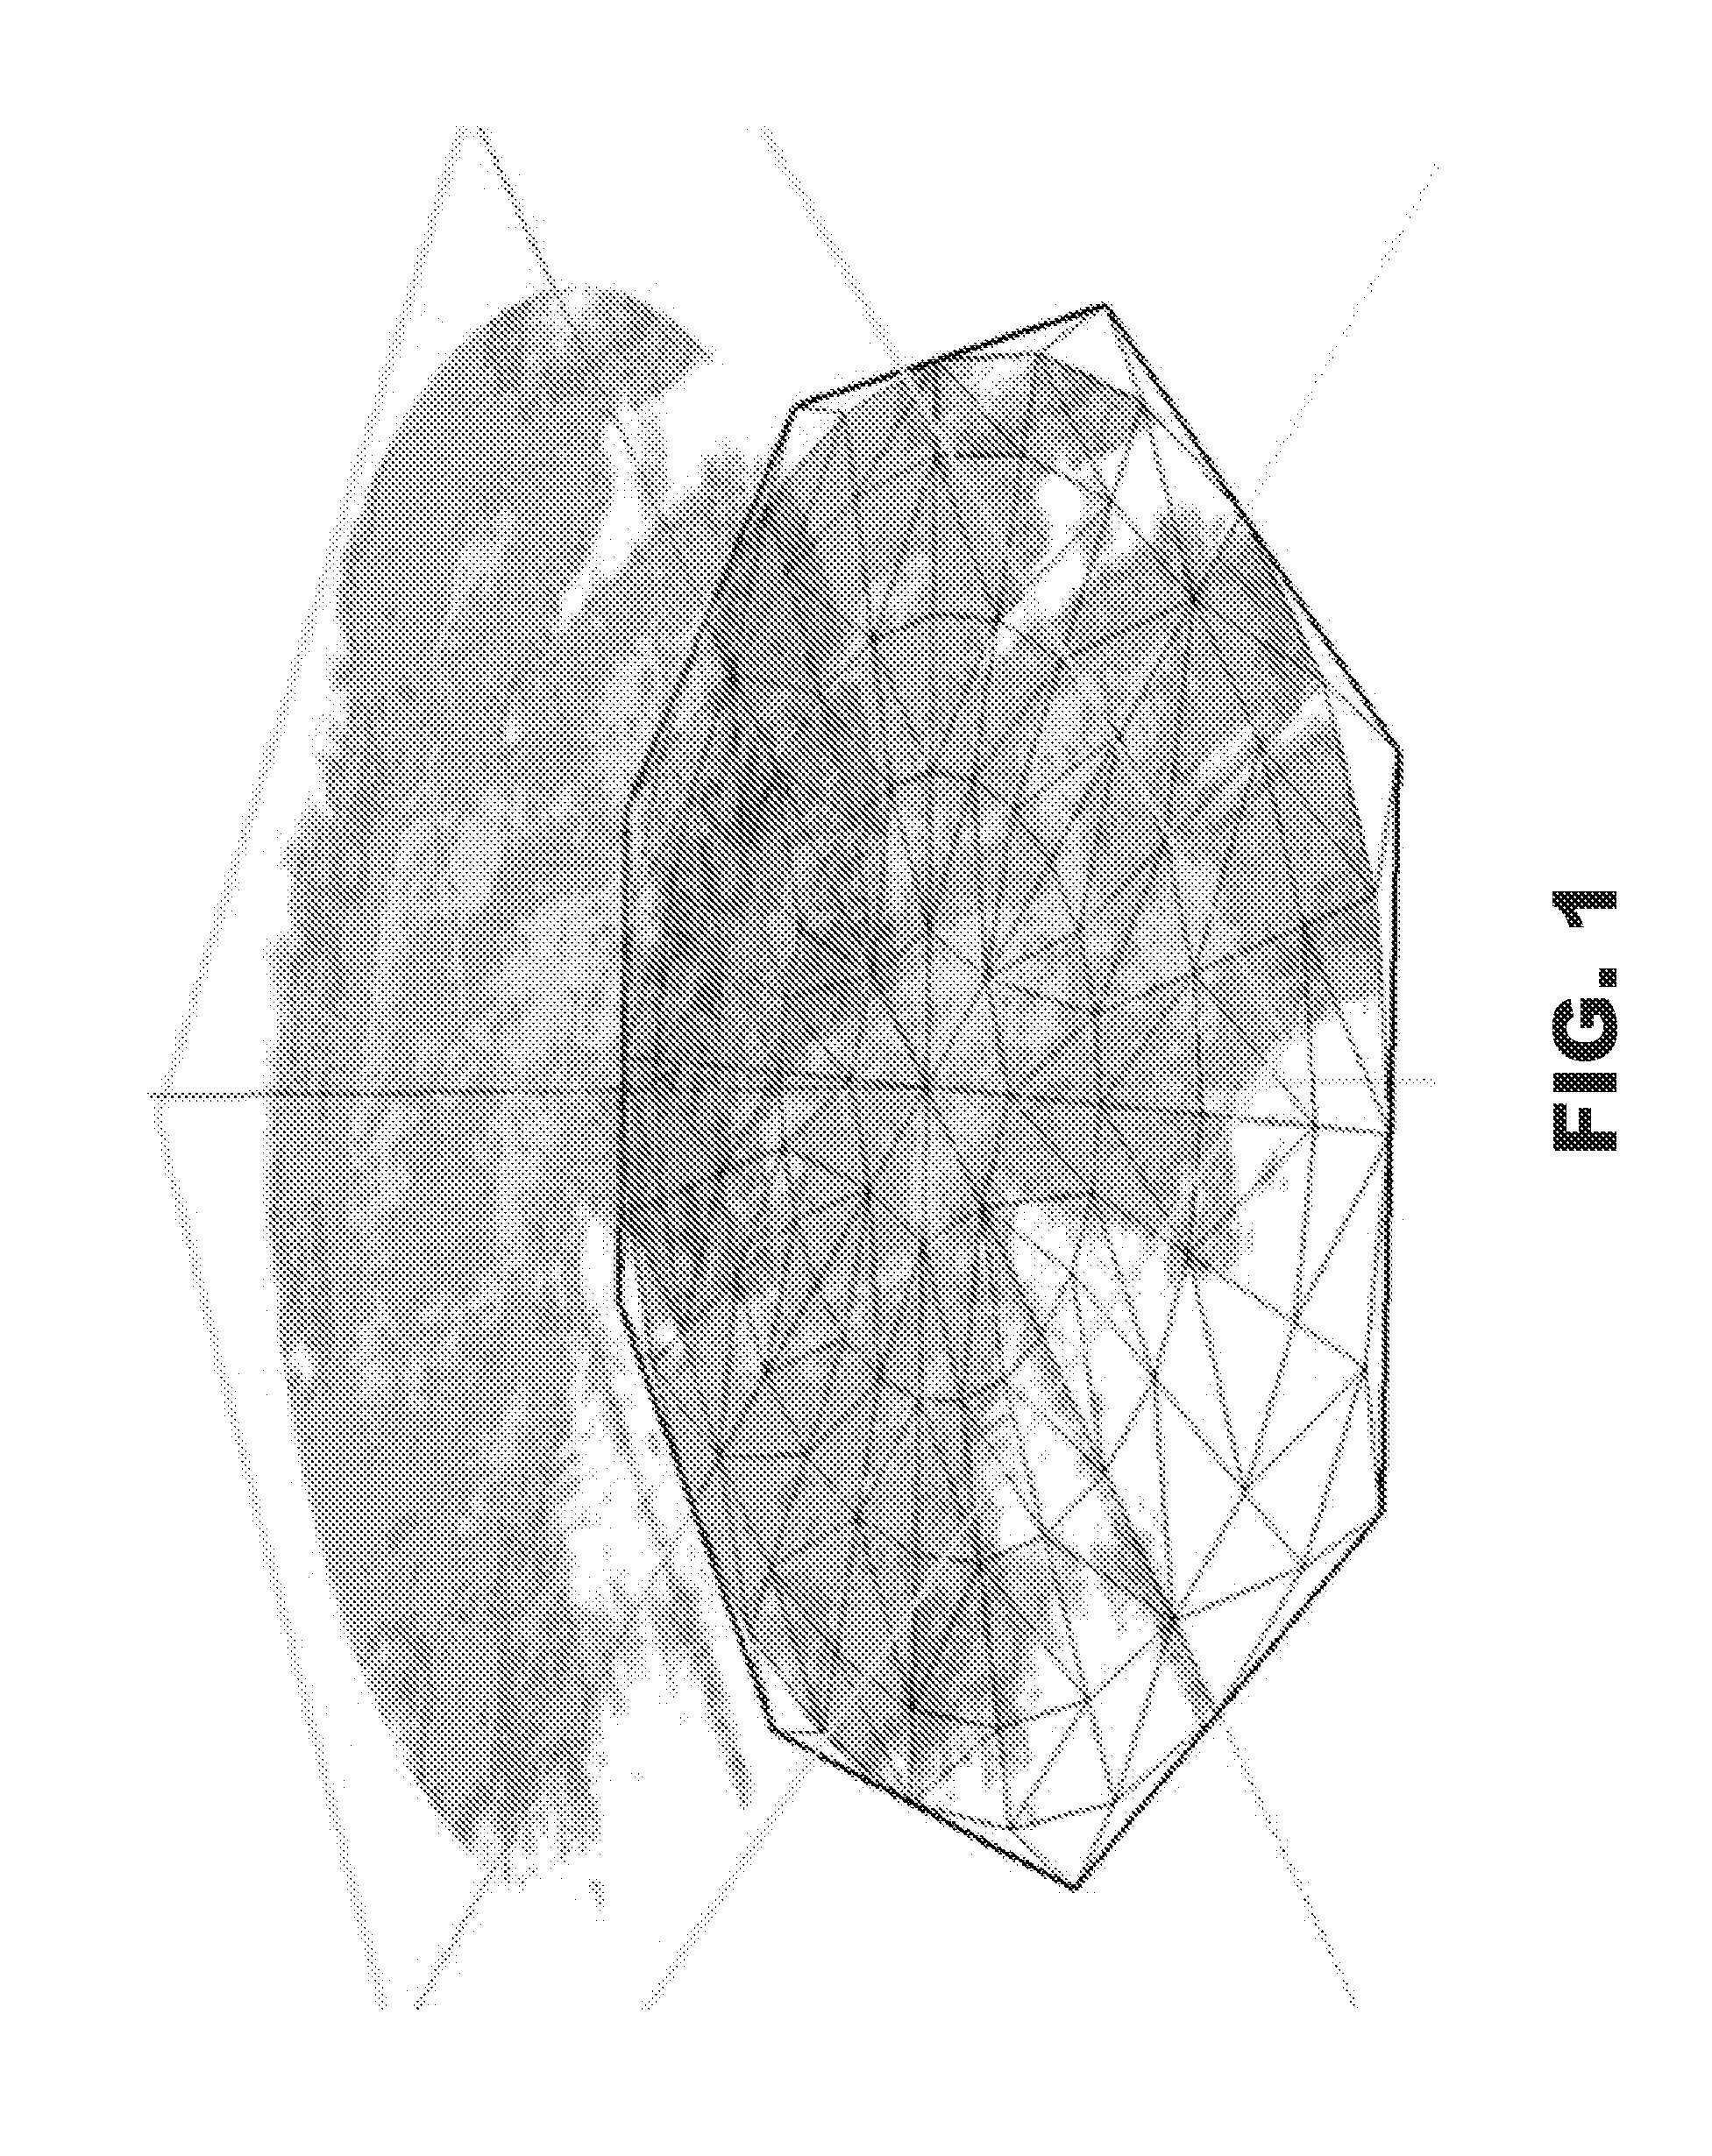 System and method for filling gaps in radar coverage